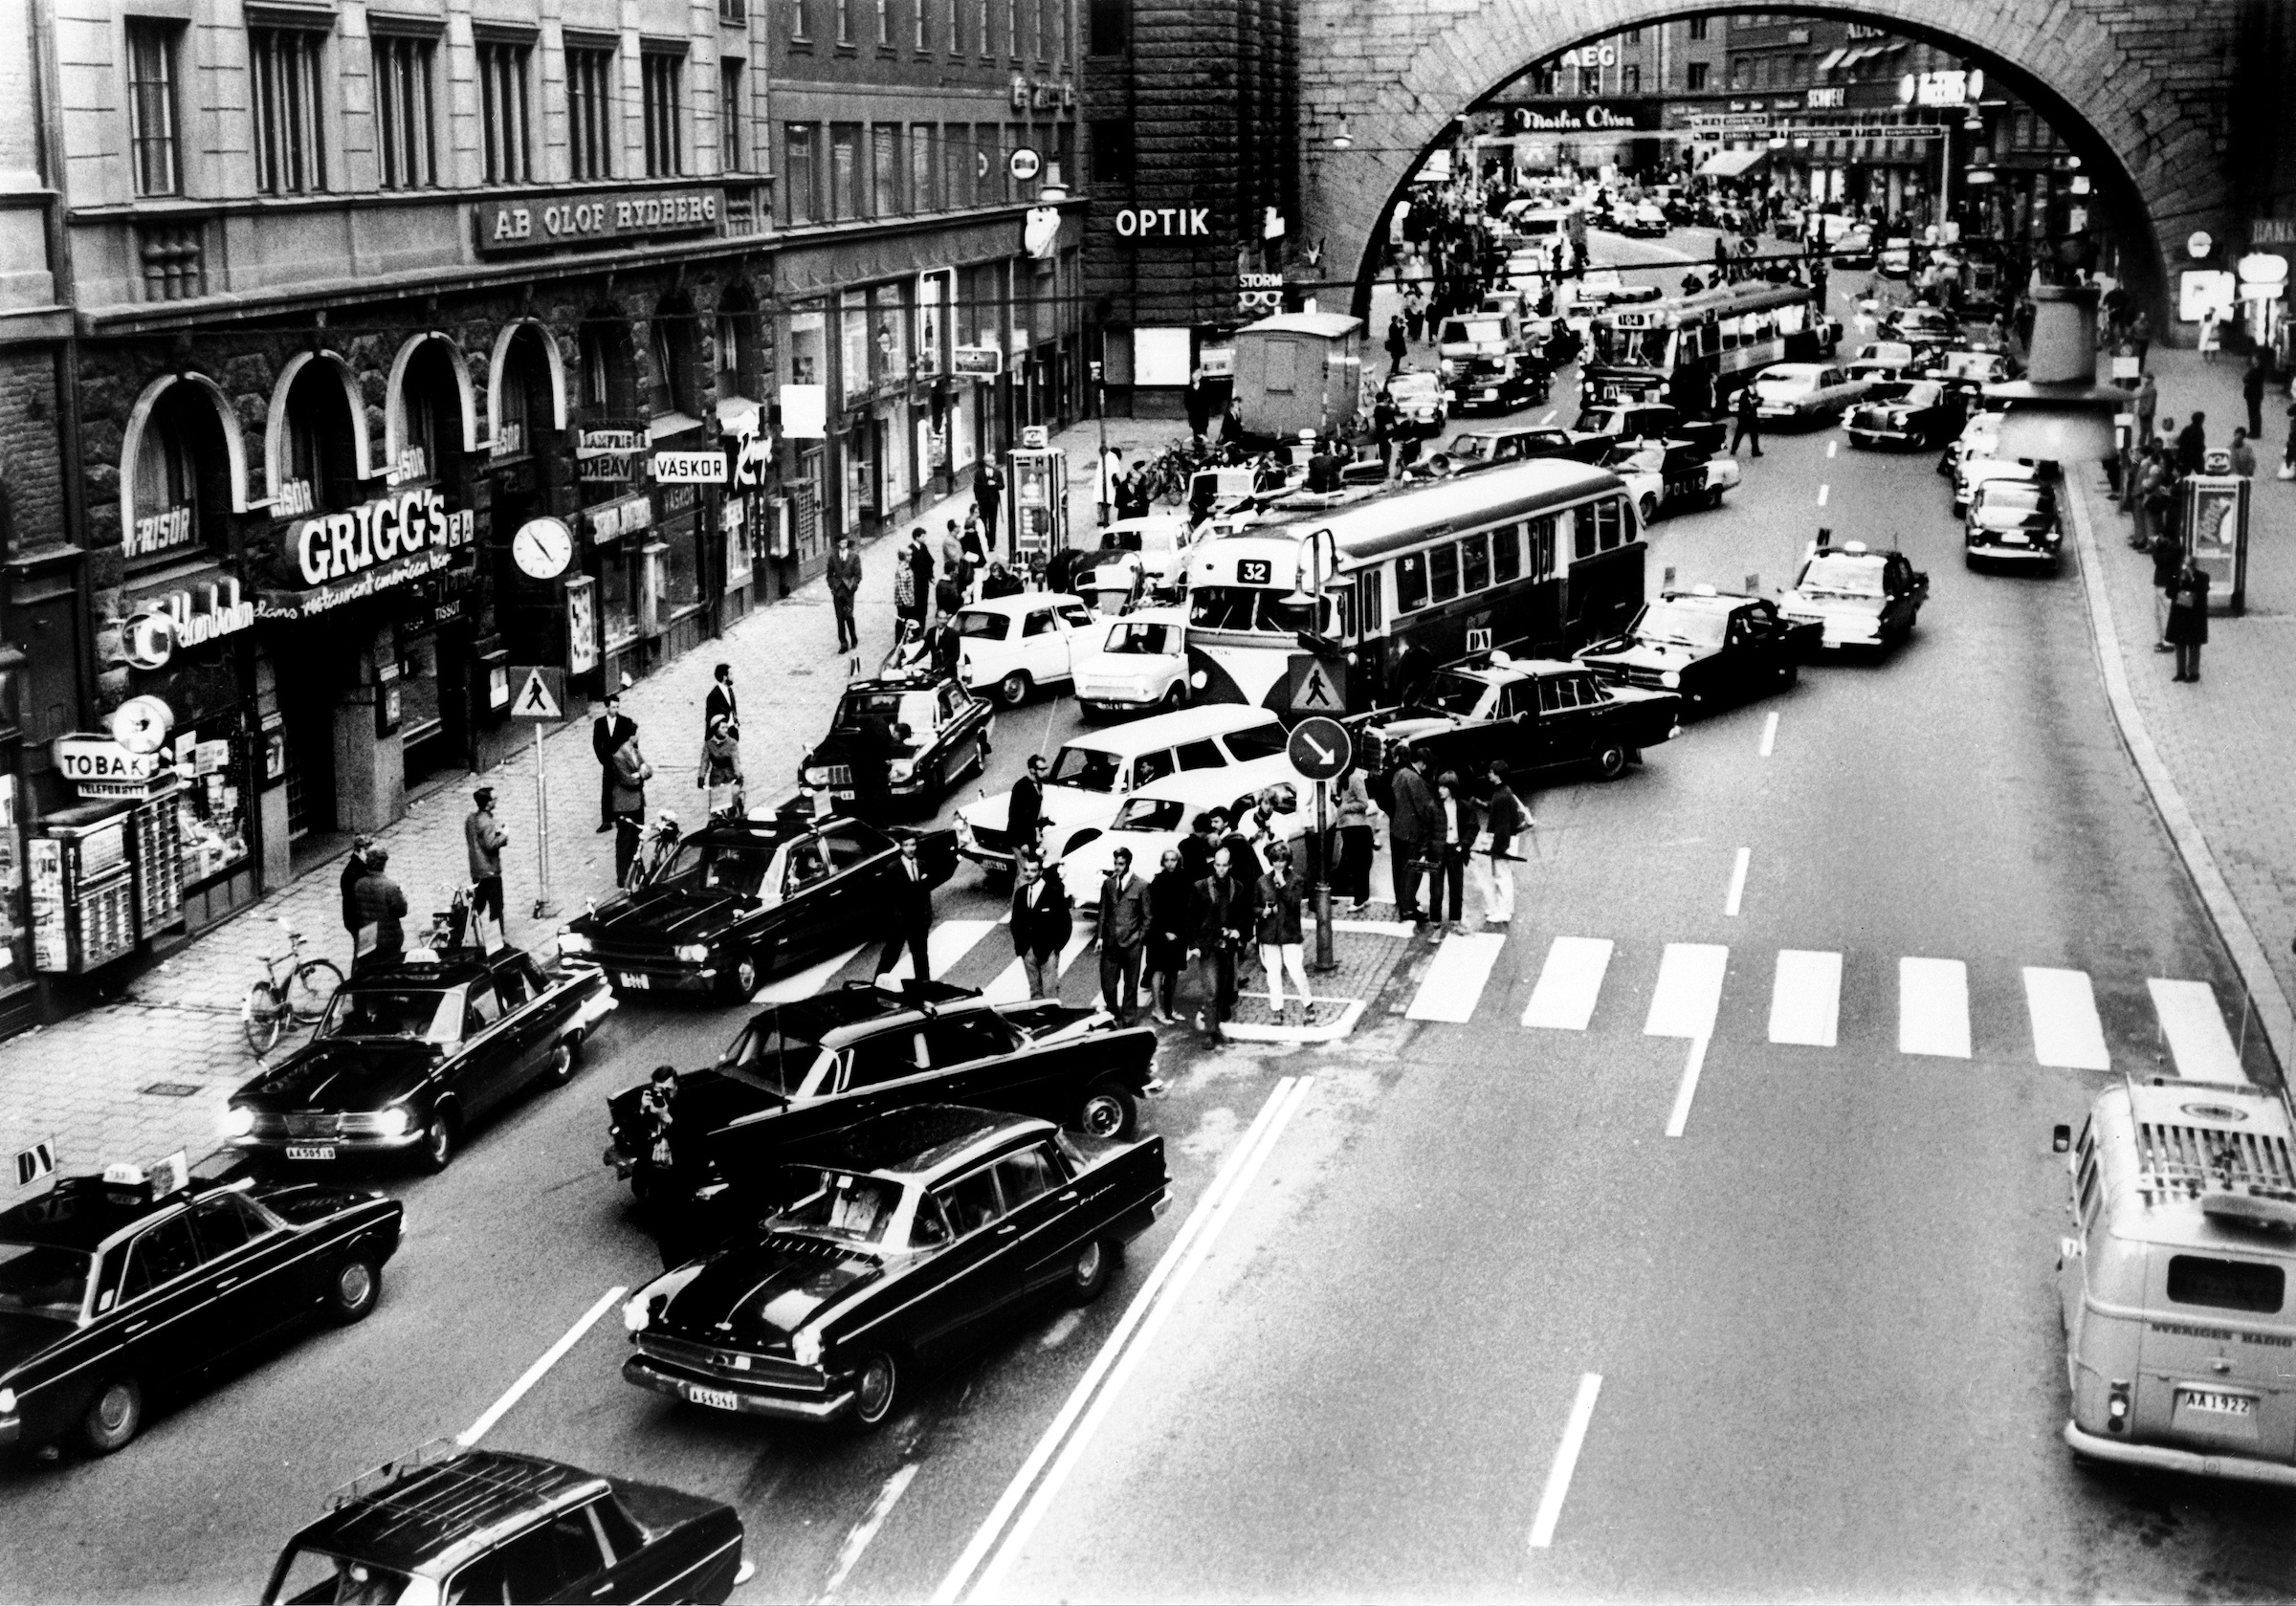 Dagen H: The day Sweden’s drivers crossed a line